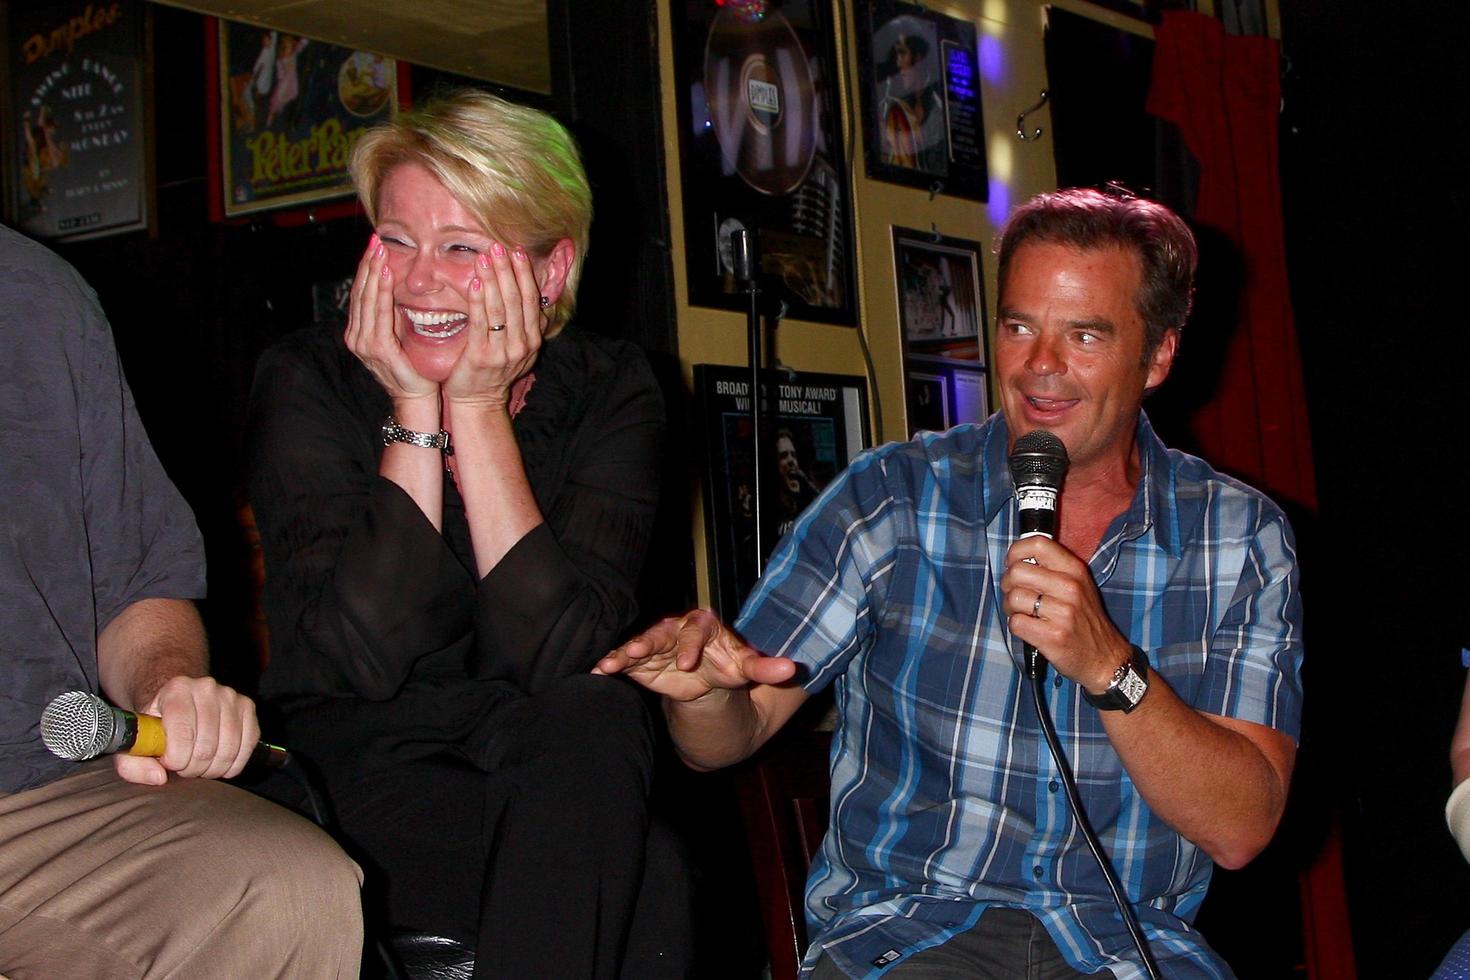 LOS ANGELES, JUN 1 -  Judi Evans, Wally Kurth at the Judi Evans Celebrates 30 years in Show Business event at the Dimples on June 1, 2013 in Burbank, CA photo